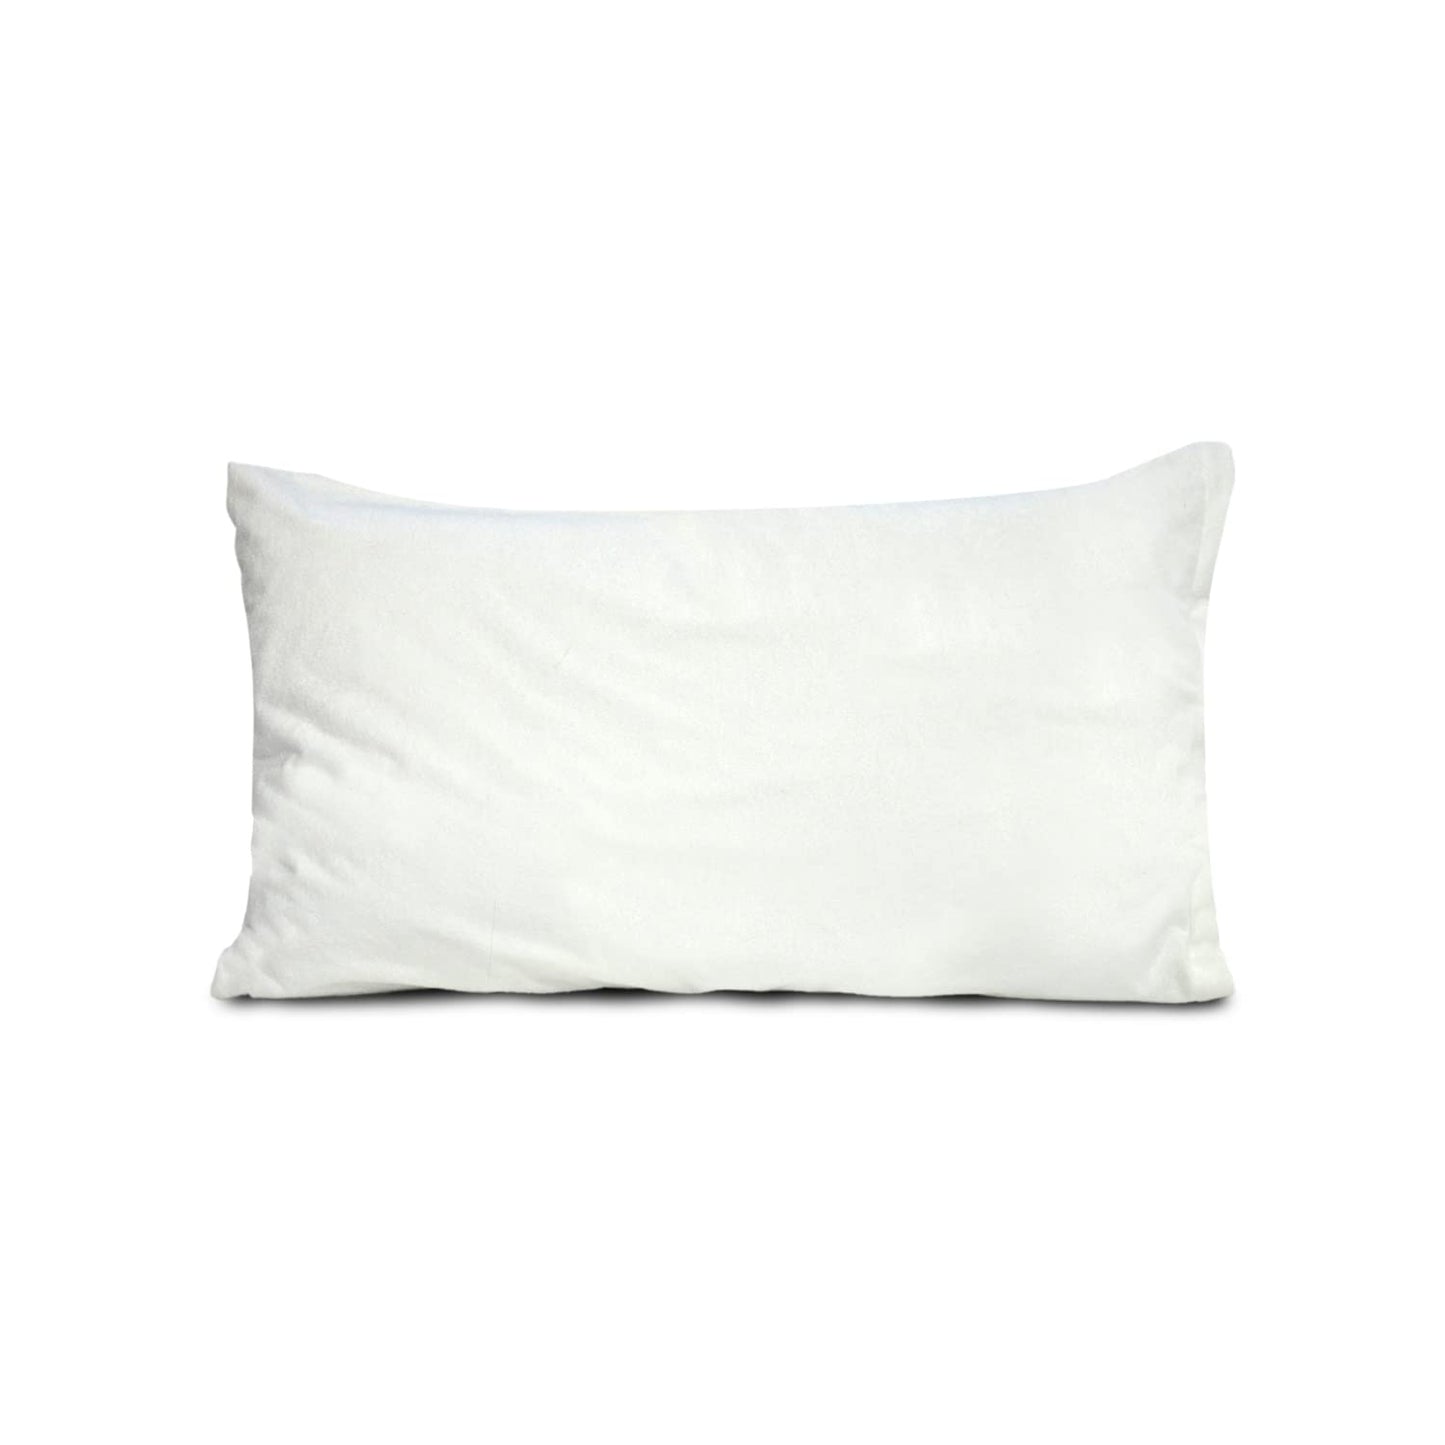 Pure White Fresh and Dust-Free Waterproof Pillow Protector